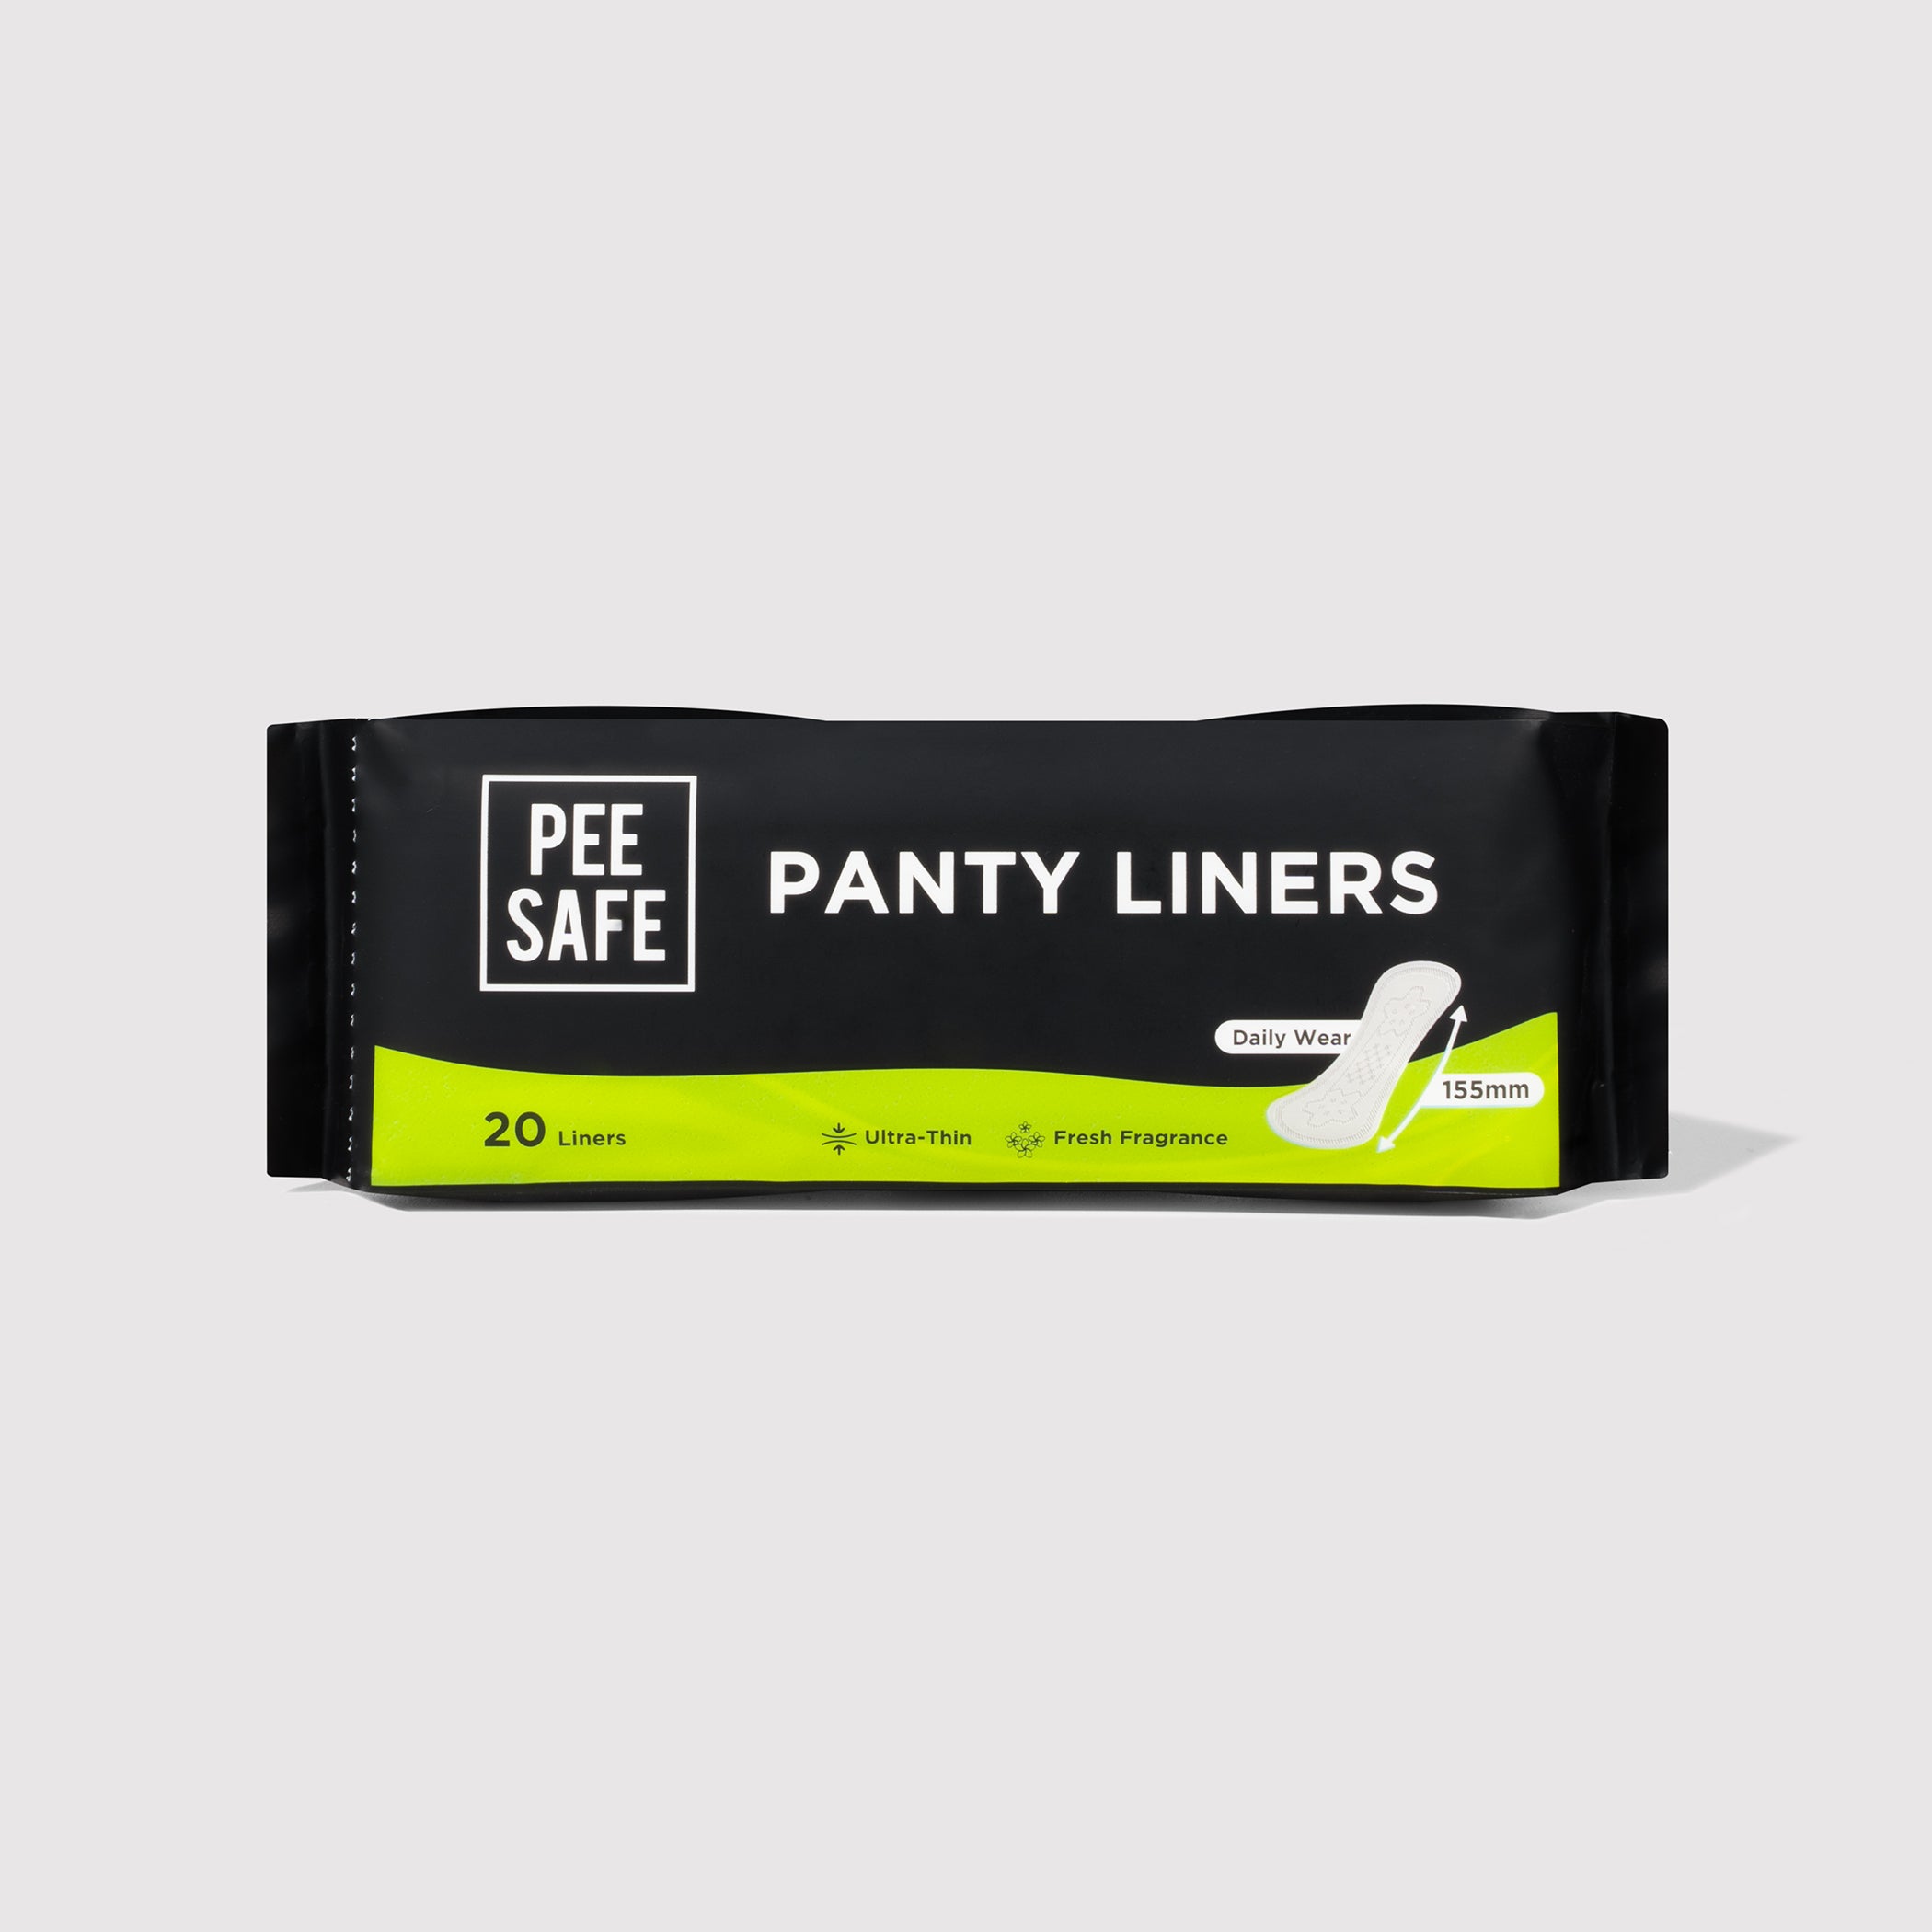 Pee Safe Daily Wear Panty Liners - 155 mm (20 Liners)